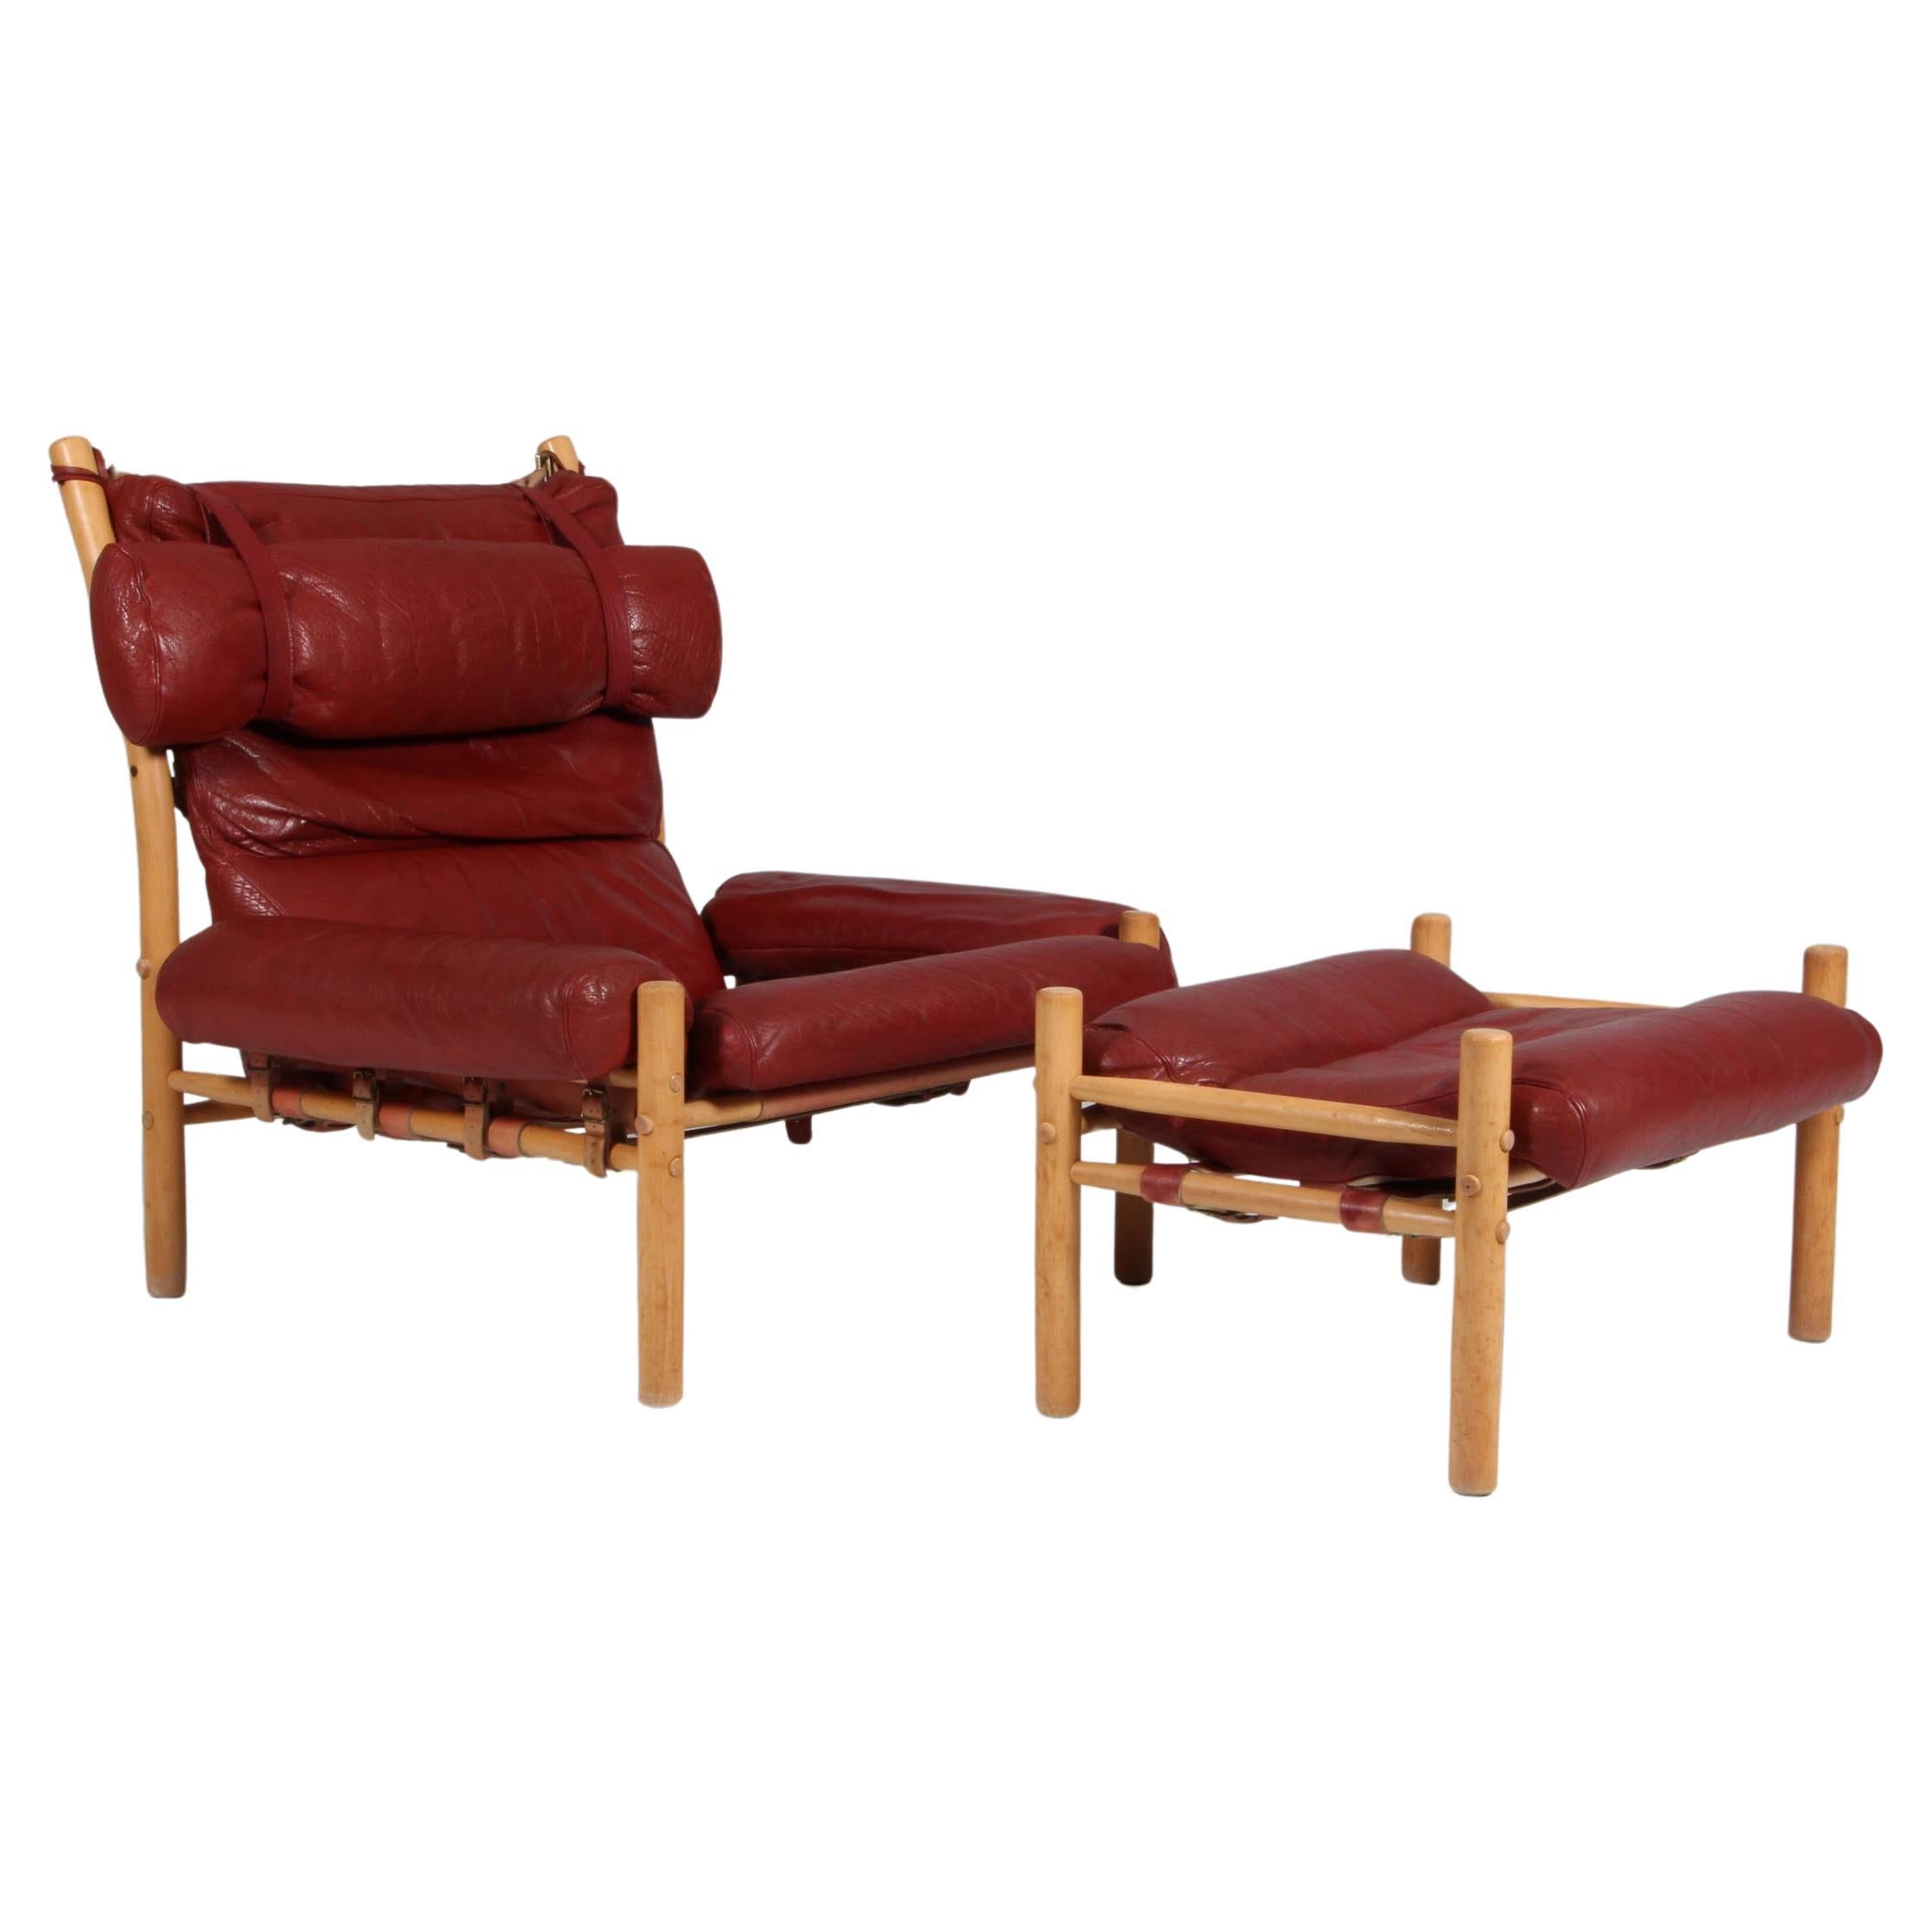 Arne Norell 'Inca' Lounge Chair with Ottoman in original leather